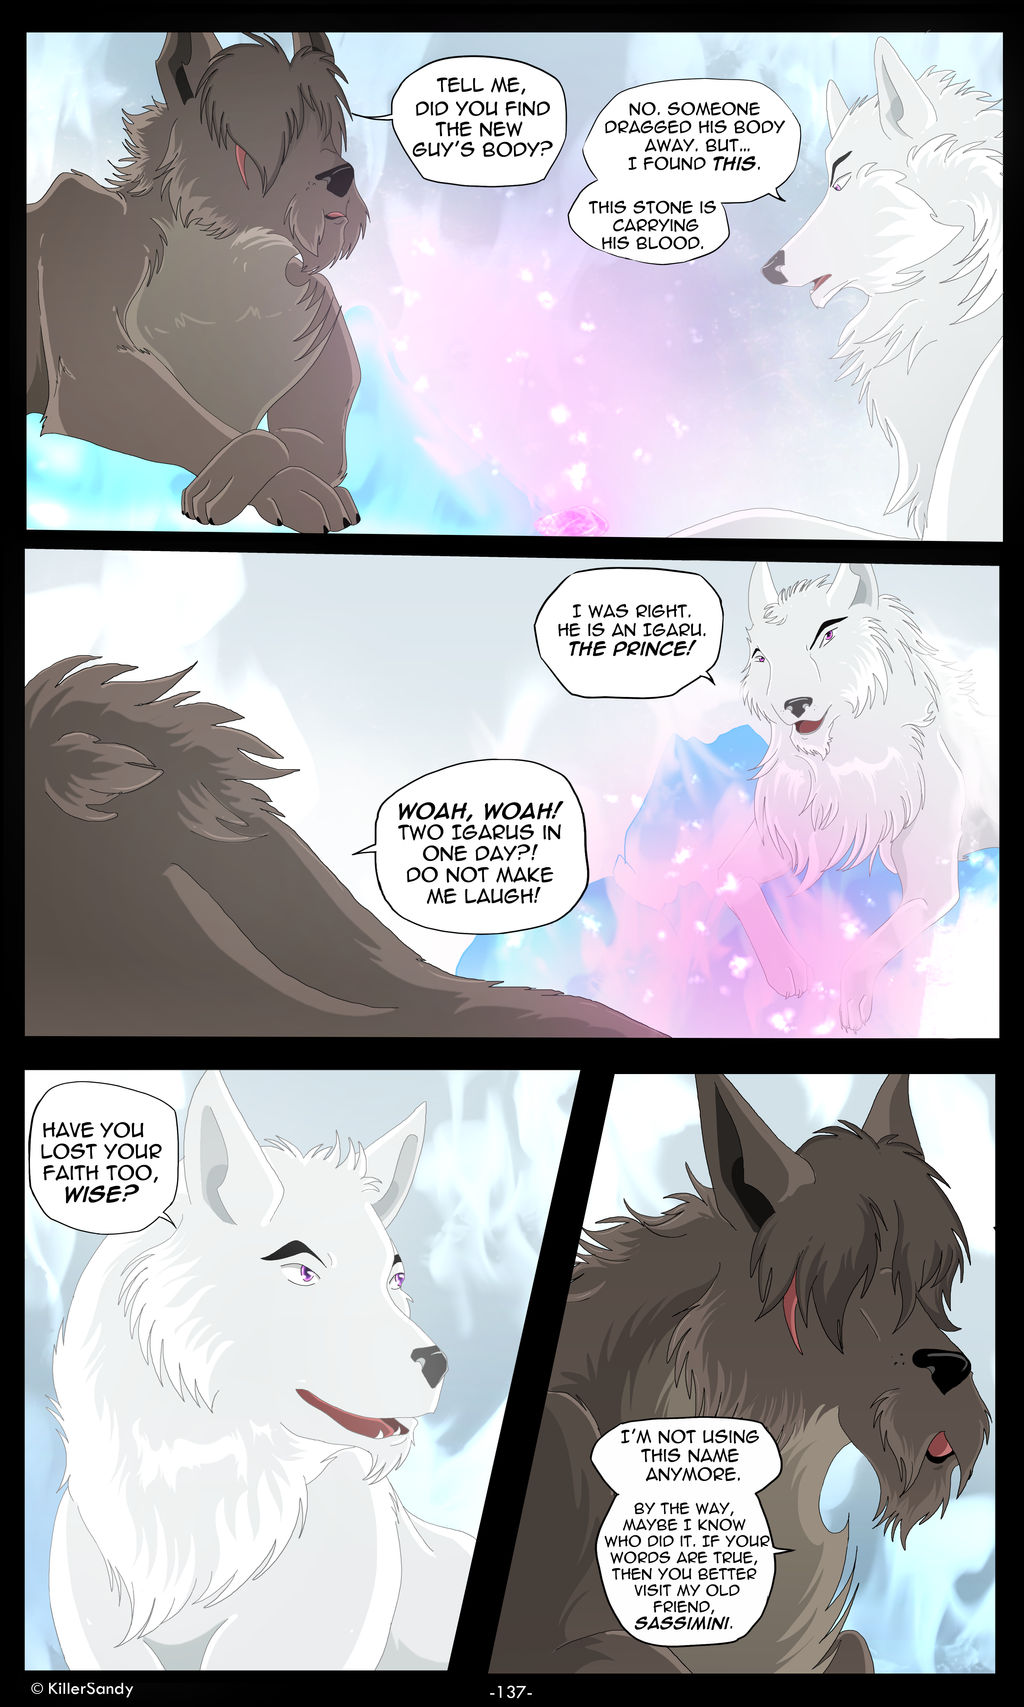 The Prince of the Moonlight Stone page 137